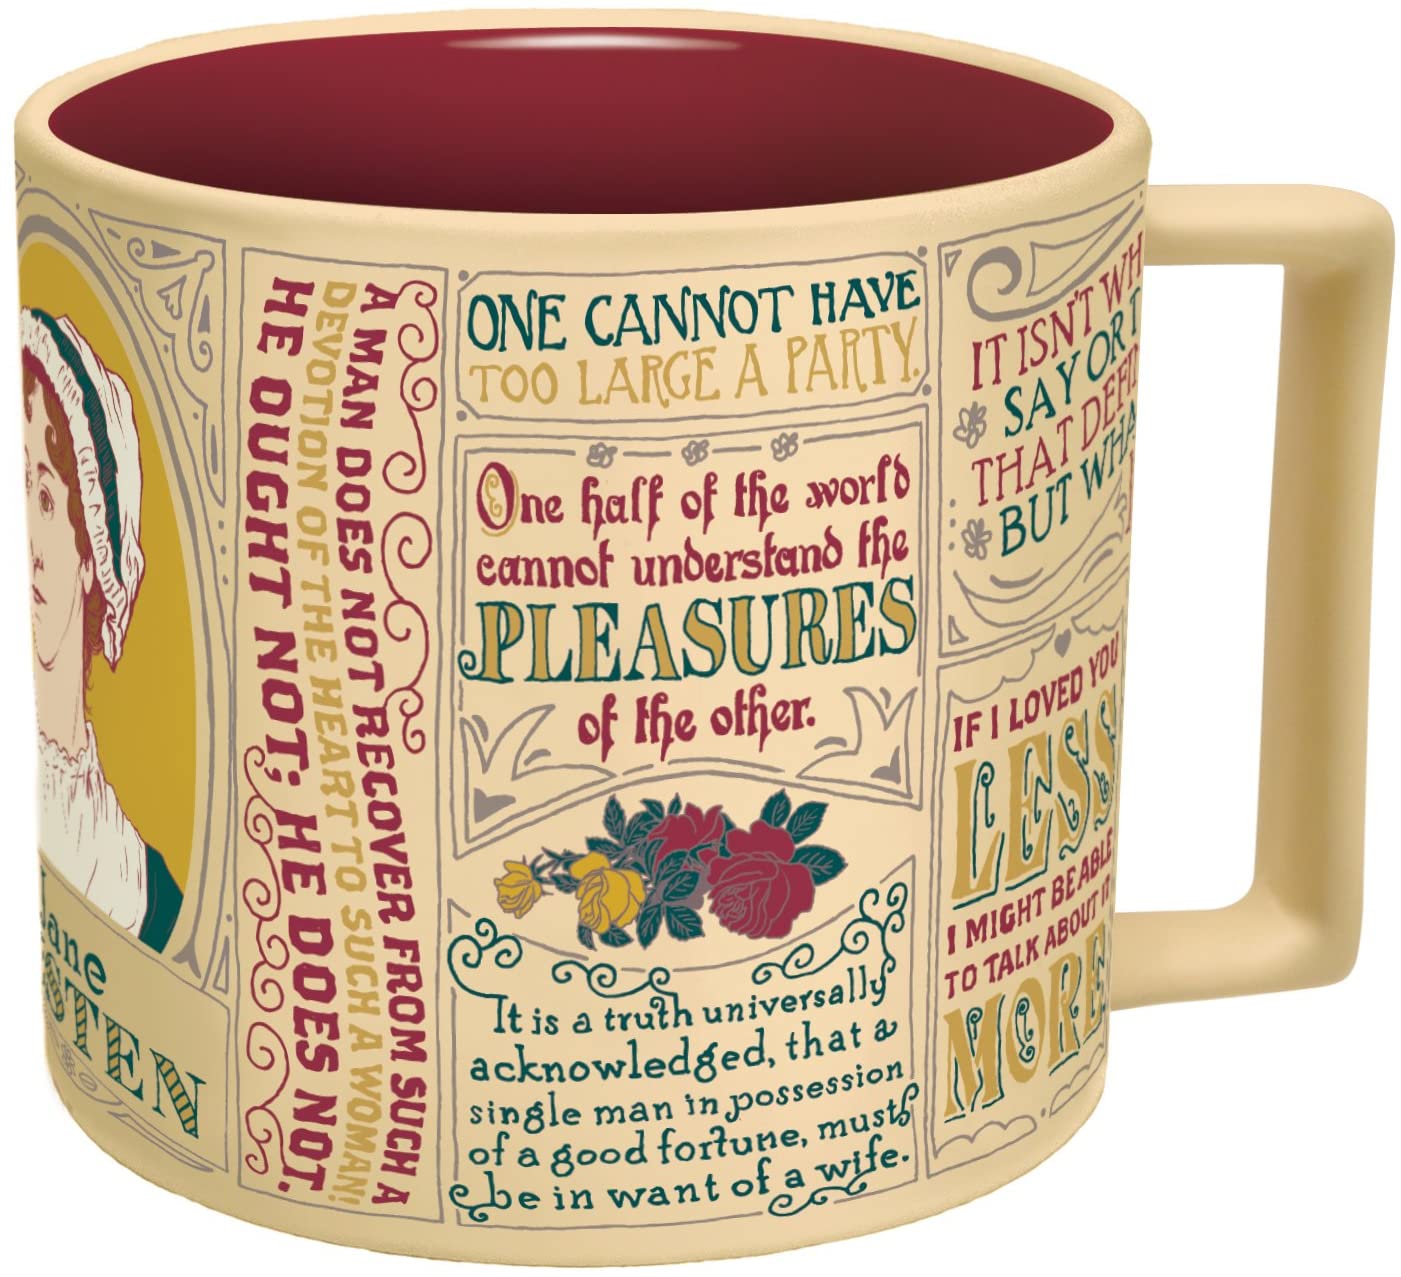 Jane Austen Coffee Mug - Austen's Most Famous Quotes and Depictions - Comes in a Fun Gift Box - e4cents